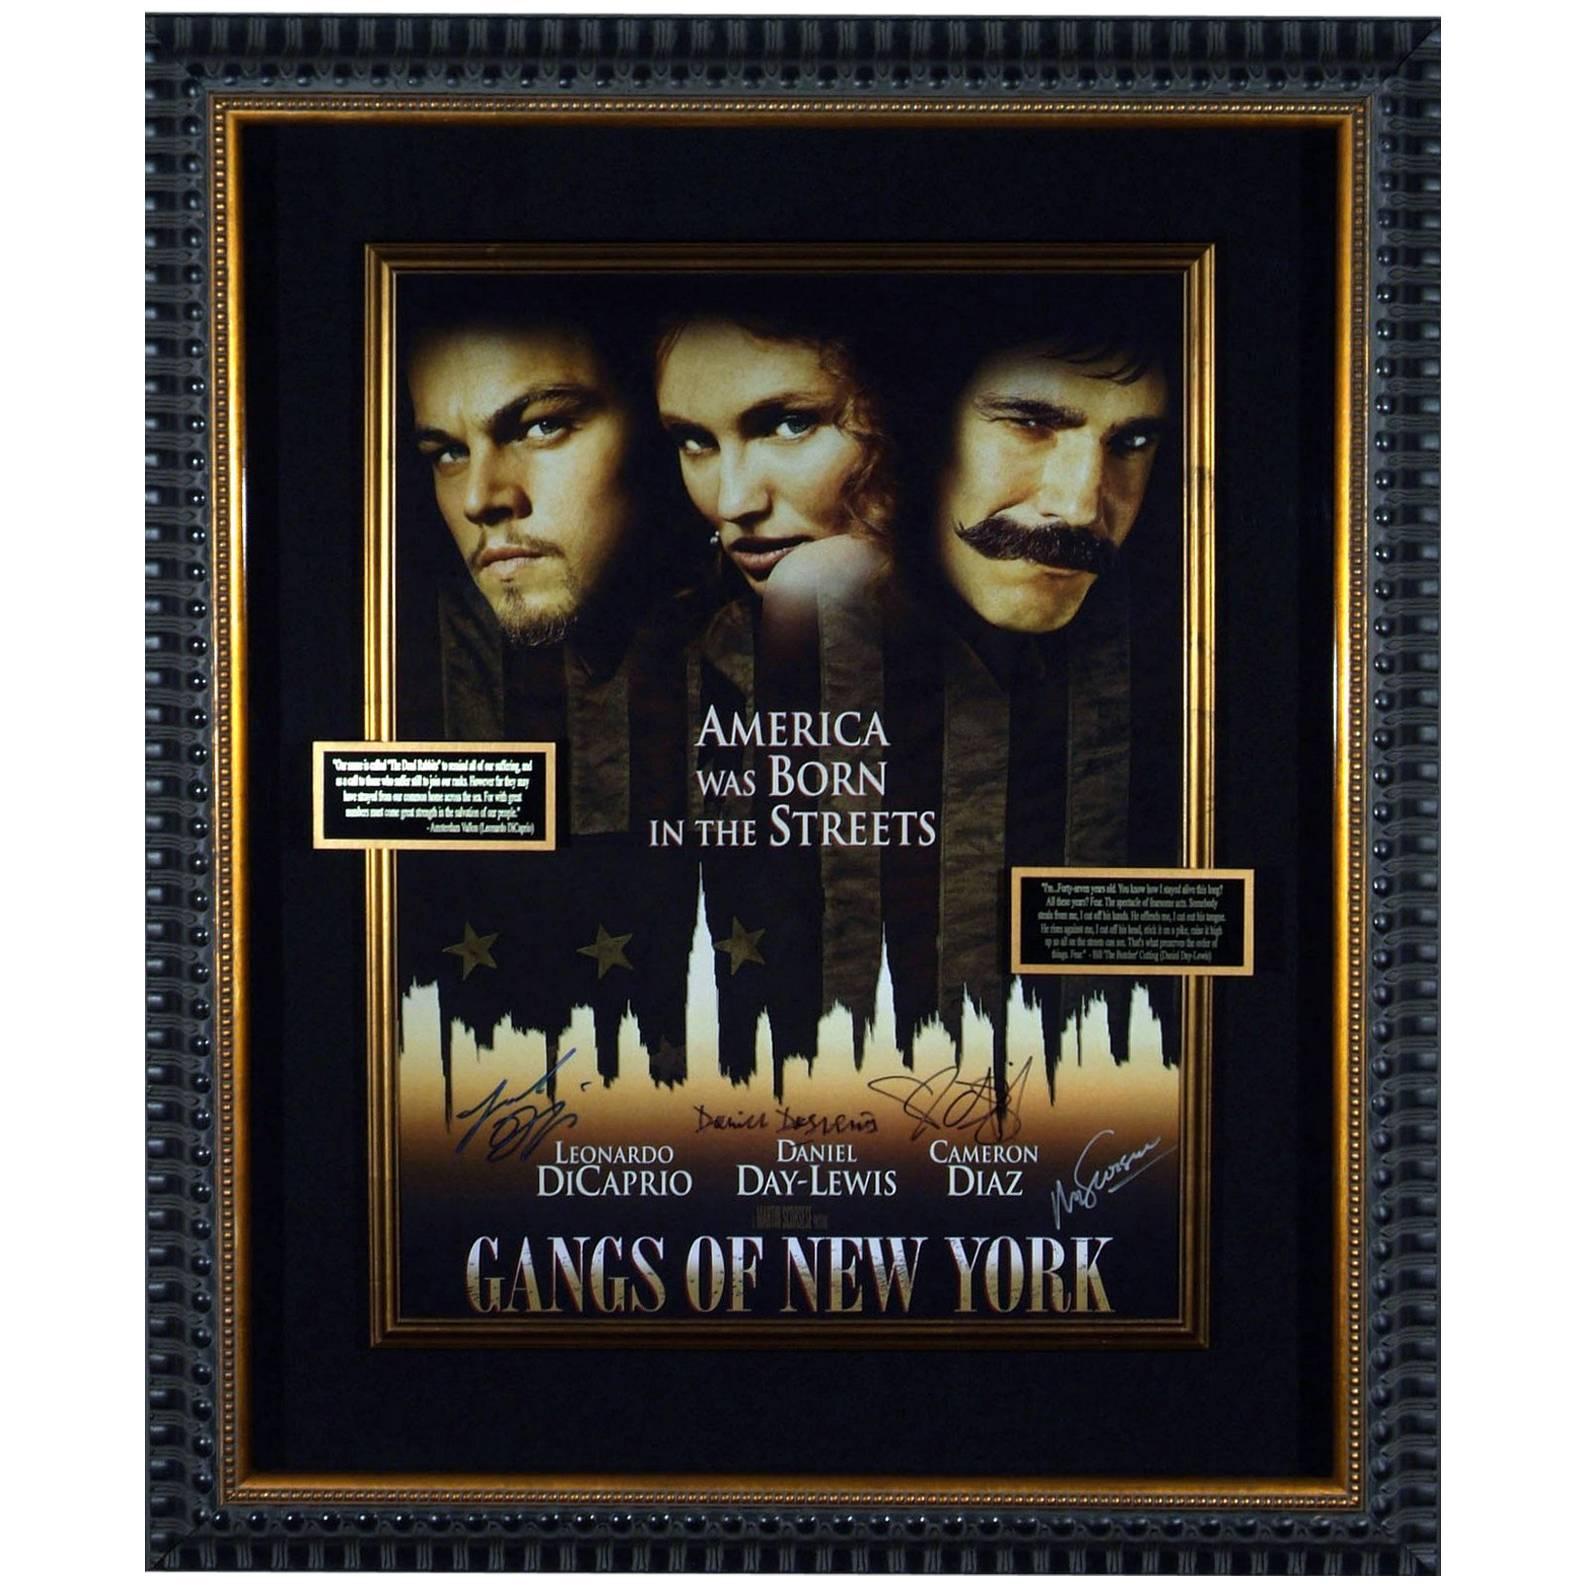 Gangs of New York Cast Autographed Movie Poster Framed Memorabilia Display For Sale